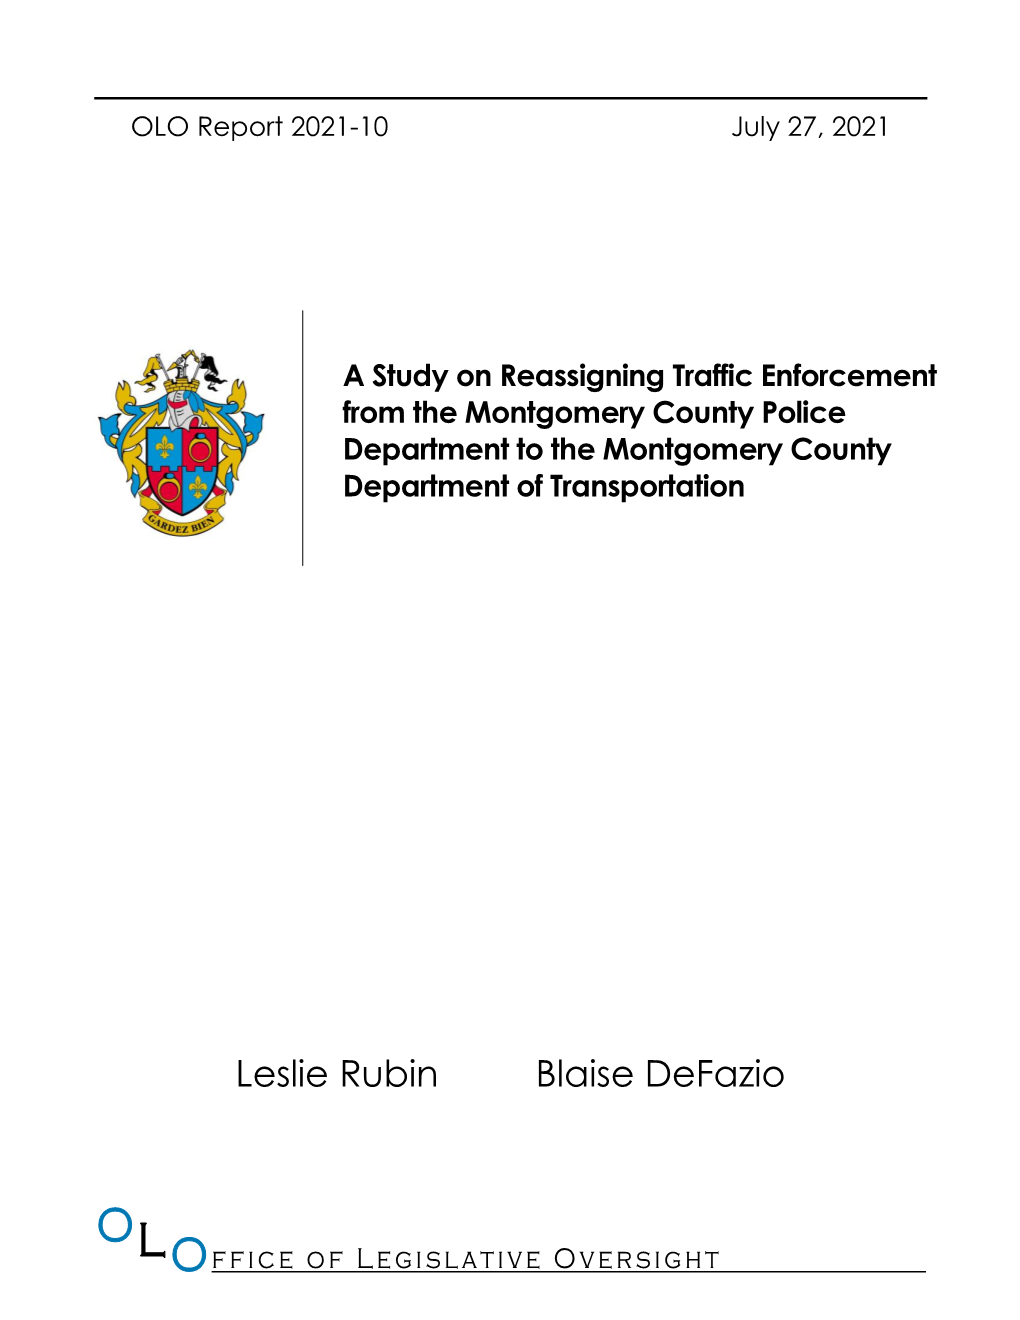 OLO Report 21-10: a Study on Reassigning Traffic Enforcement from the Montgomery County Police Department to the Montgomery Coun